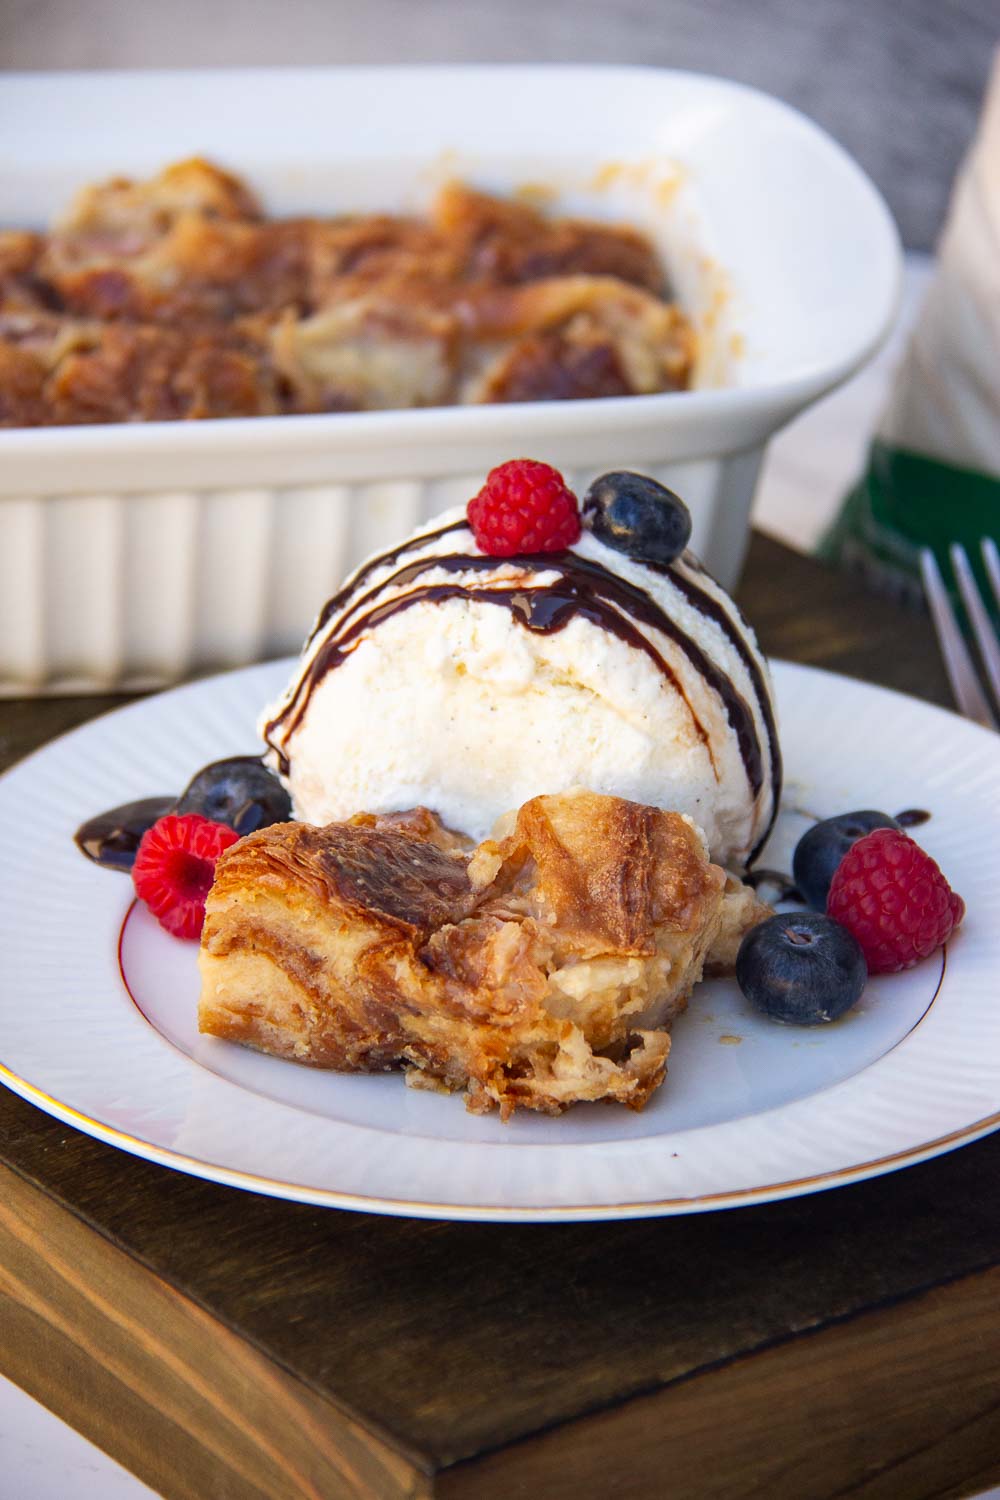 This overnight breakfast croissant casserole is so good and like a morning hug on your plate. It has the perfect mix of custard and bread pudding and is absolutely irresistible with all the fresh berries thrown in.